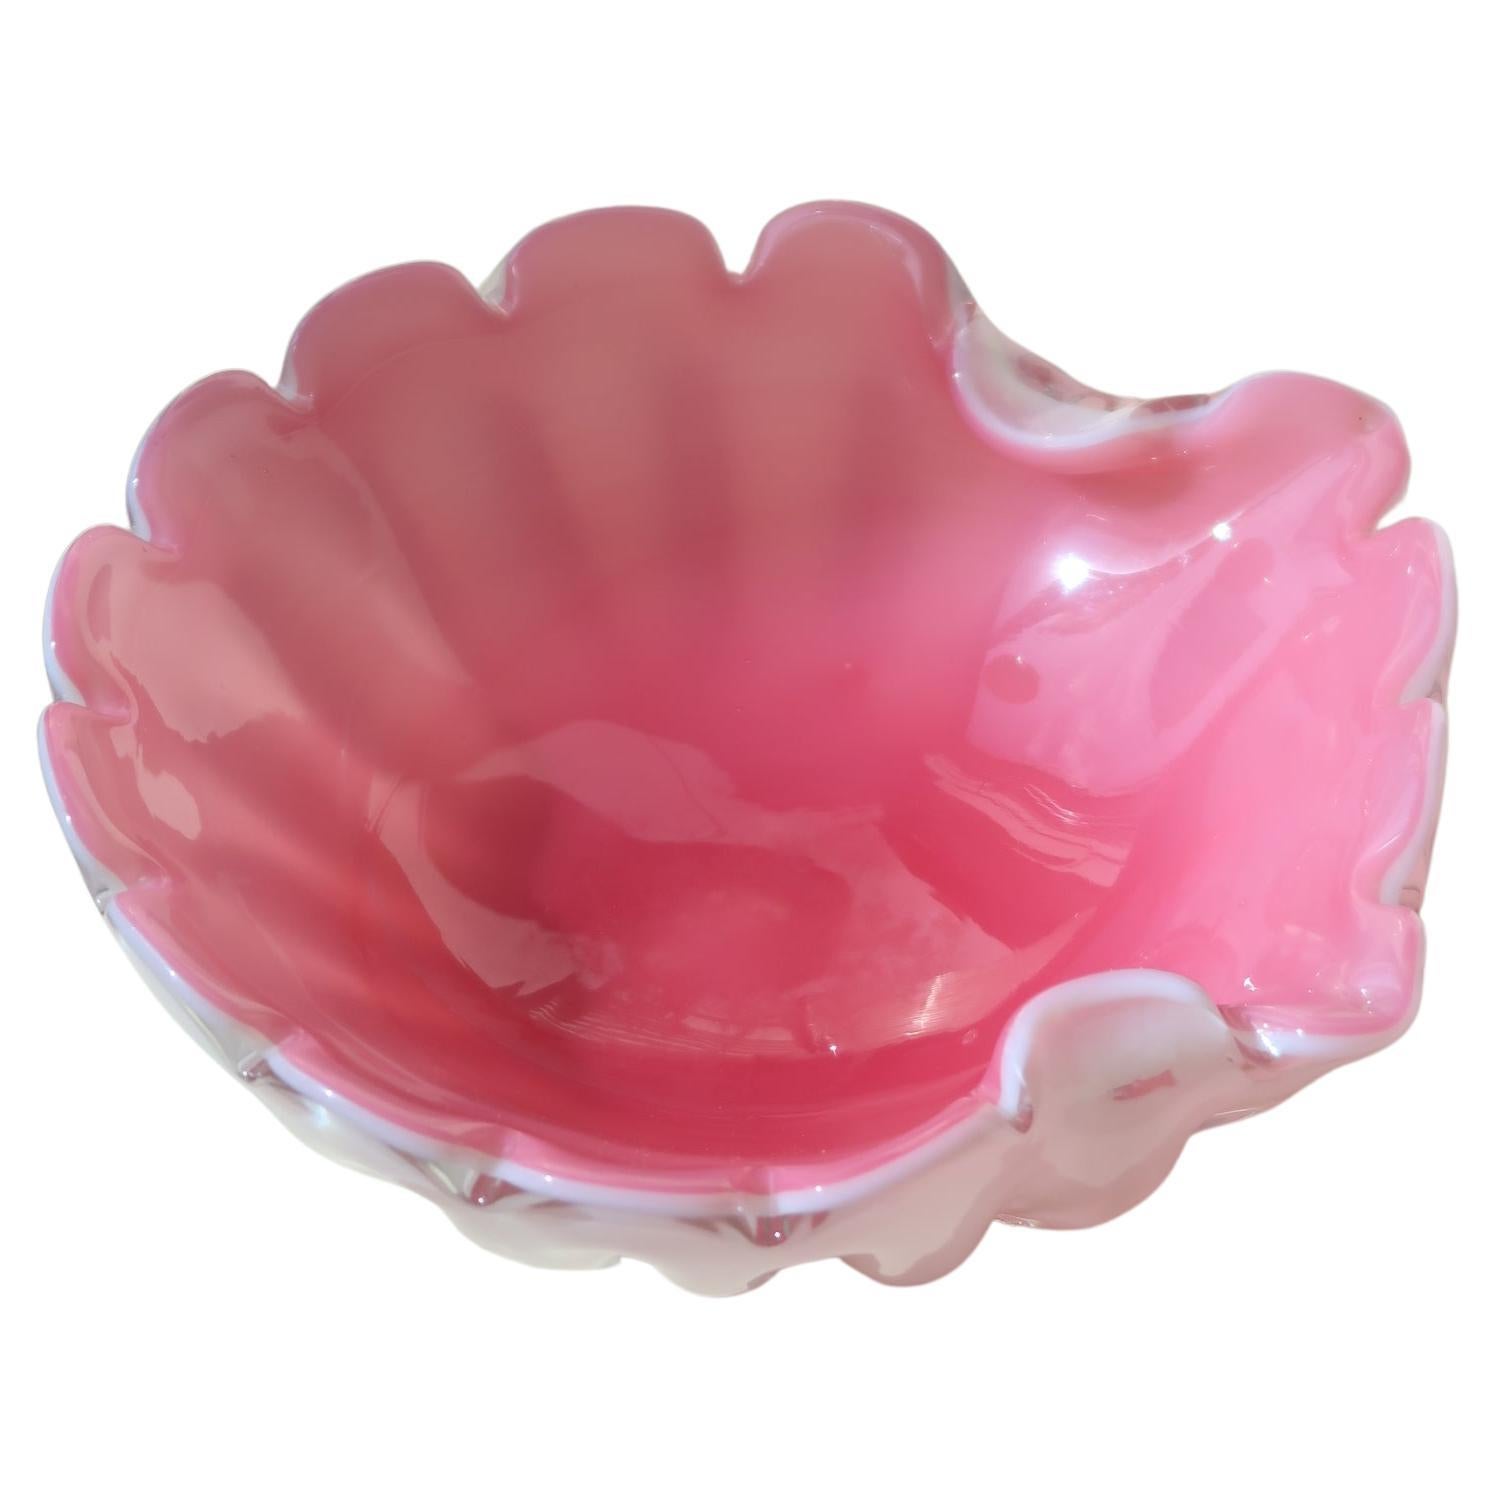 Vintage Murano Pink Opal Shell Clam Bowl Mouth Blown Glass